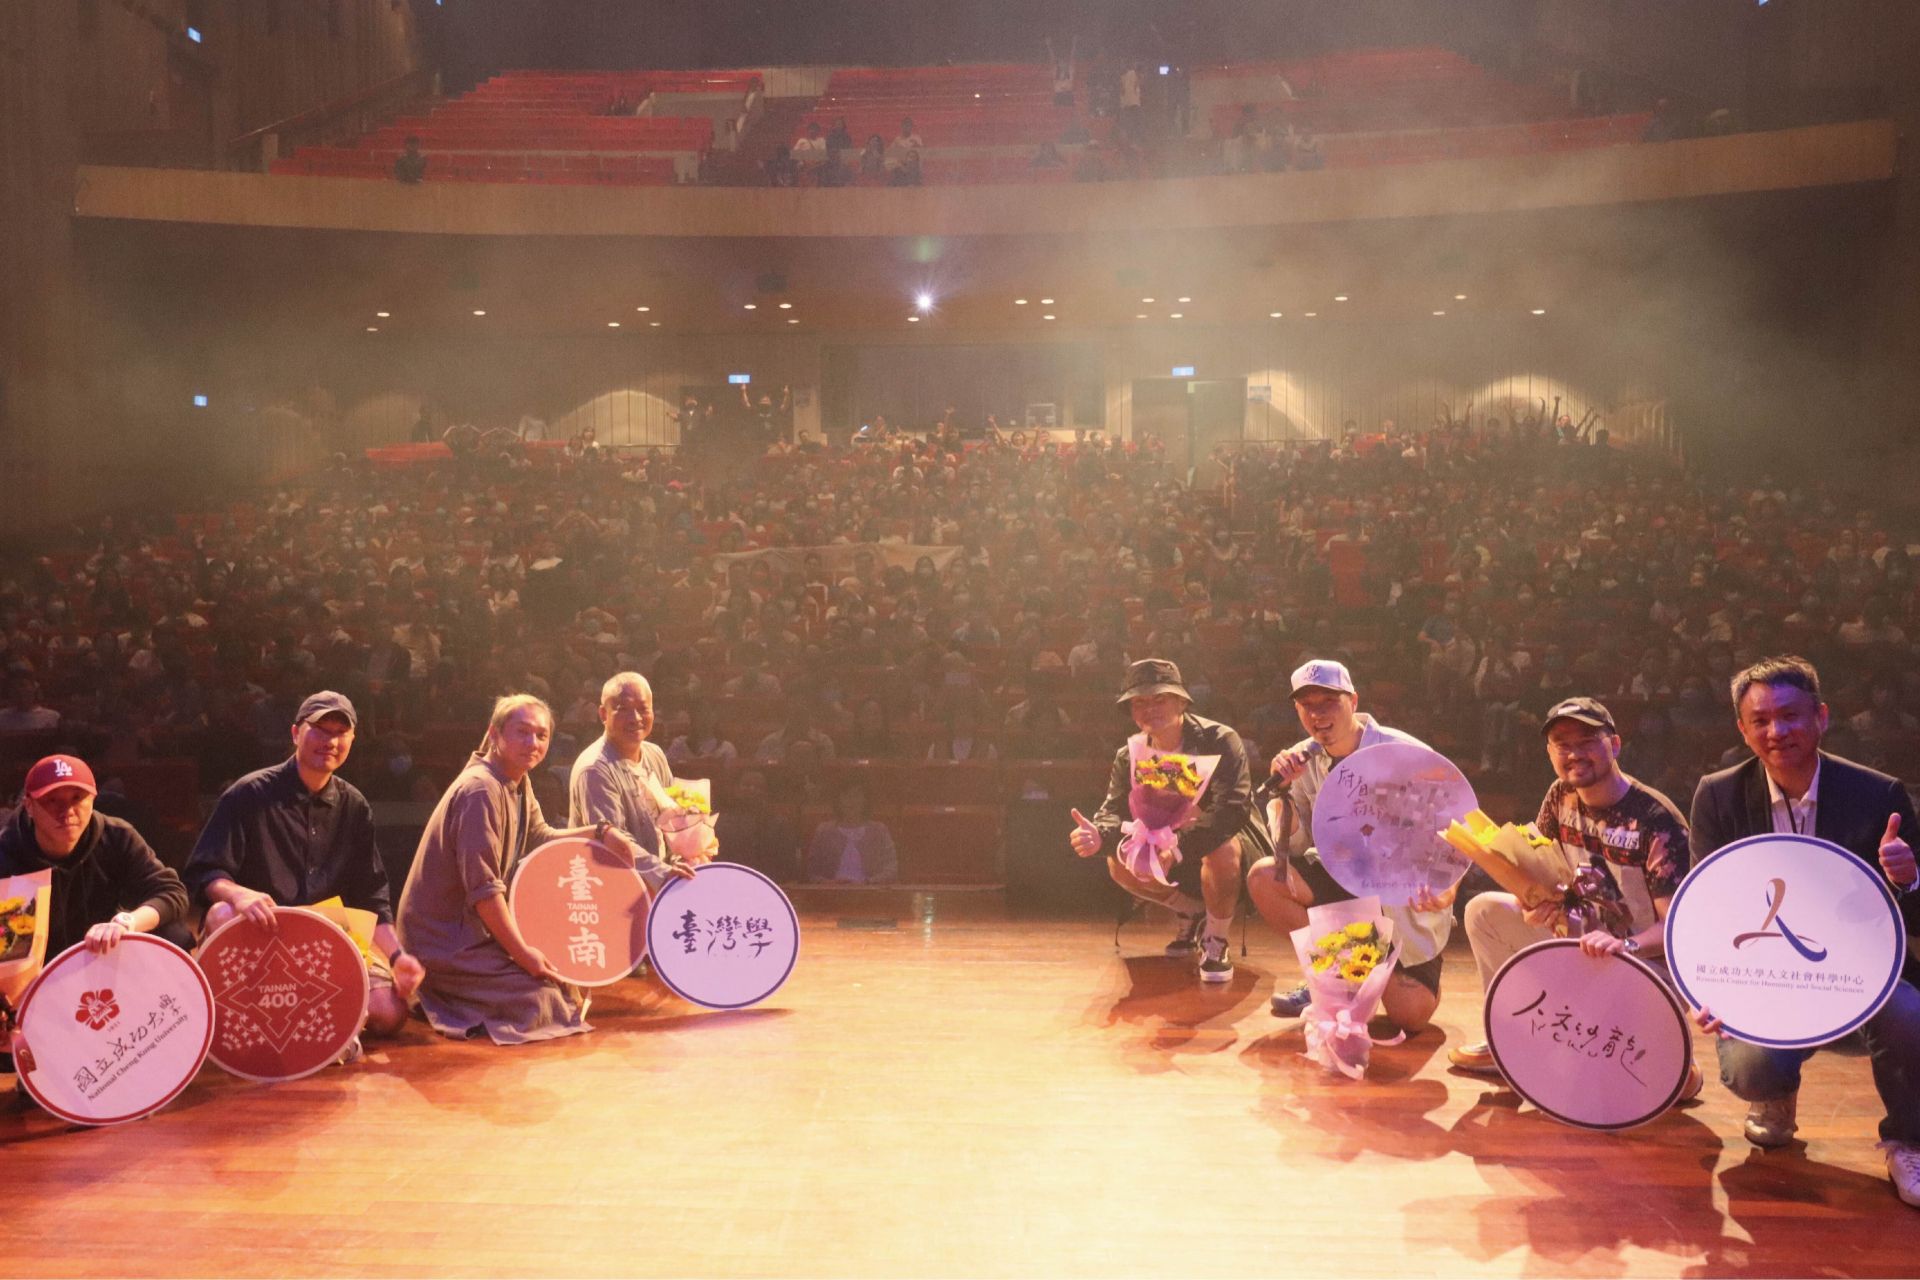 The 'Tainan 400' Concert: Experience the Vibrancy and Charm of the Cultural Heritage of Tainan's 400 Years.